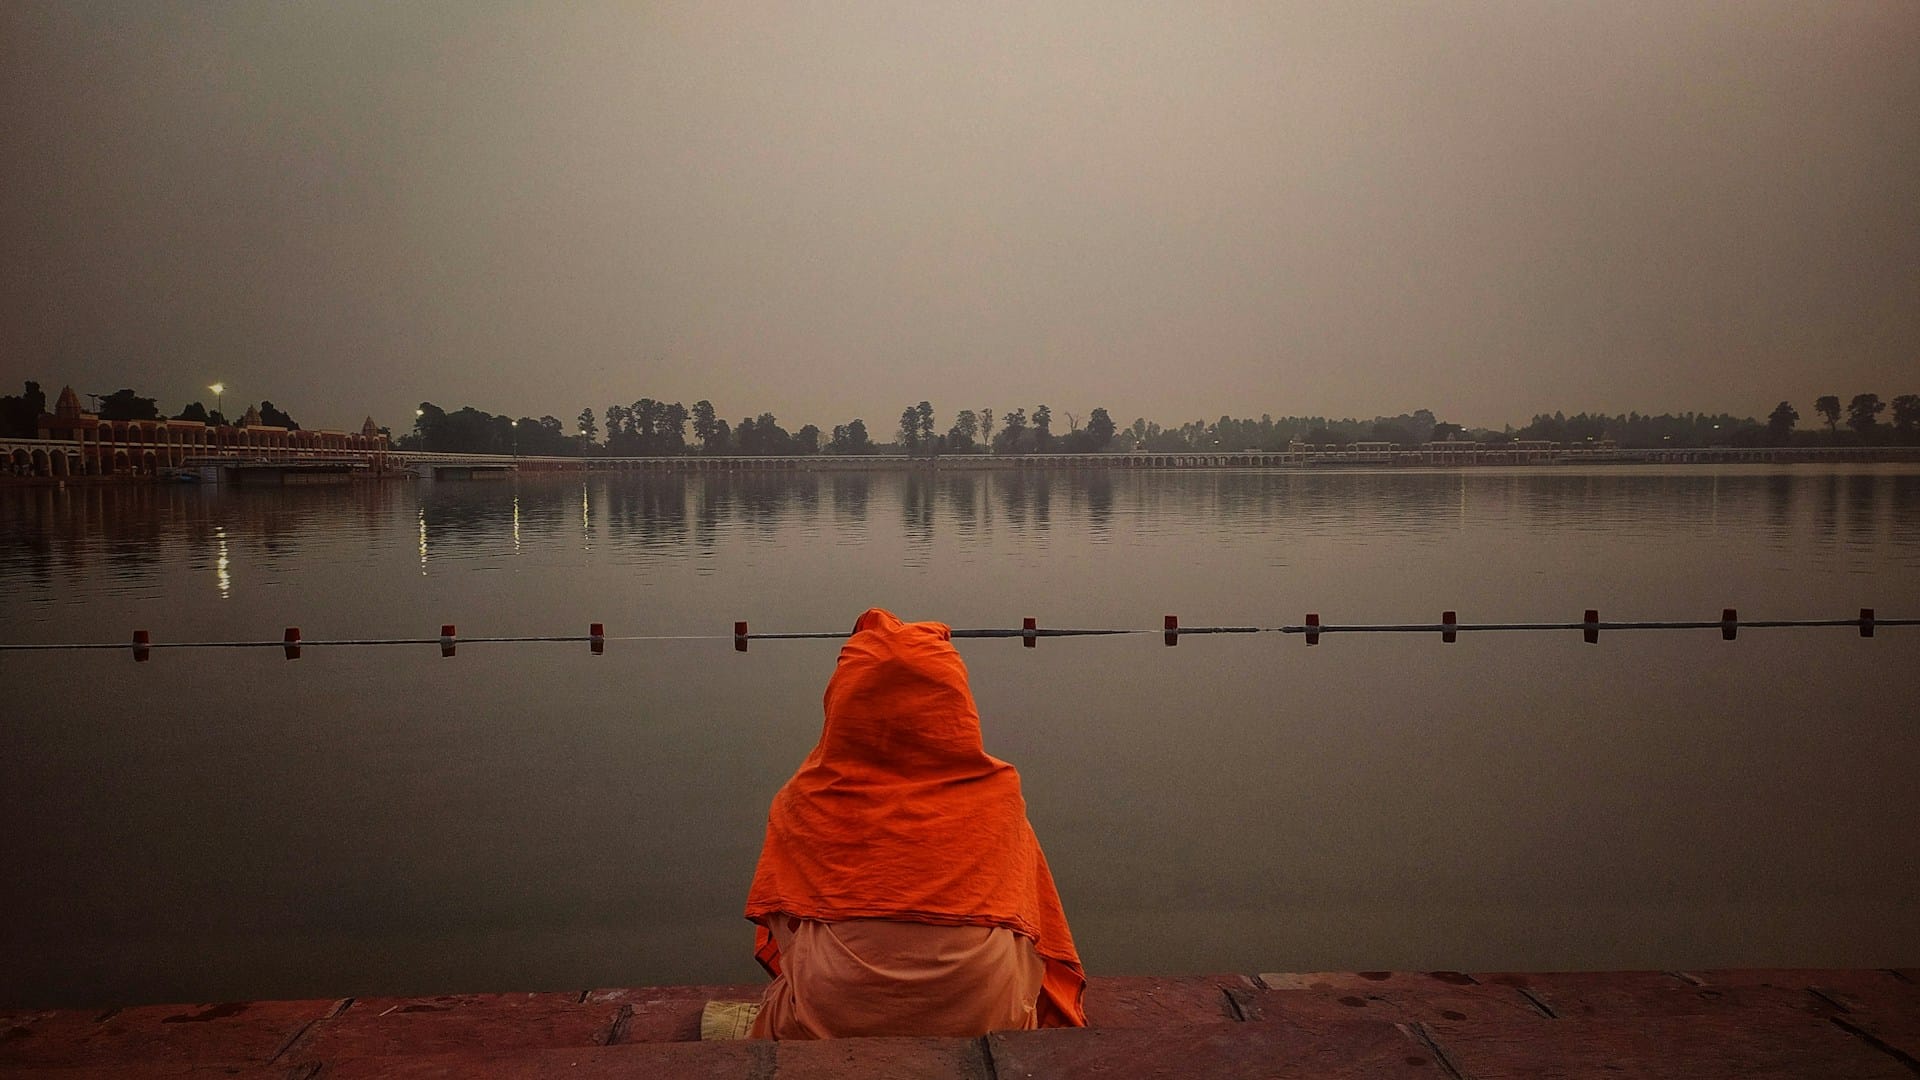 ascetic sitting by the banks of a river in India